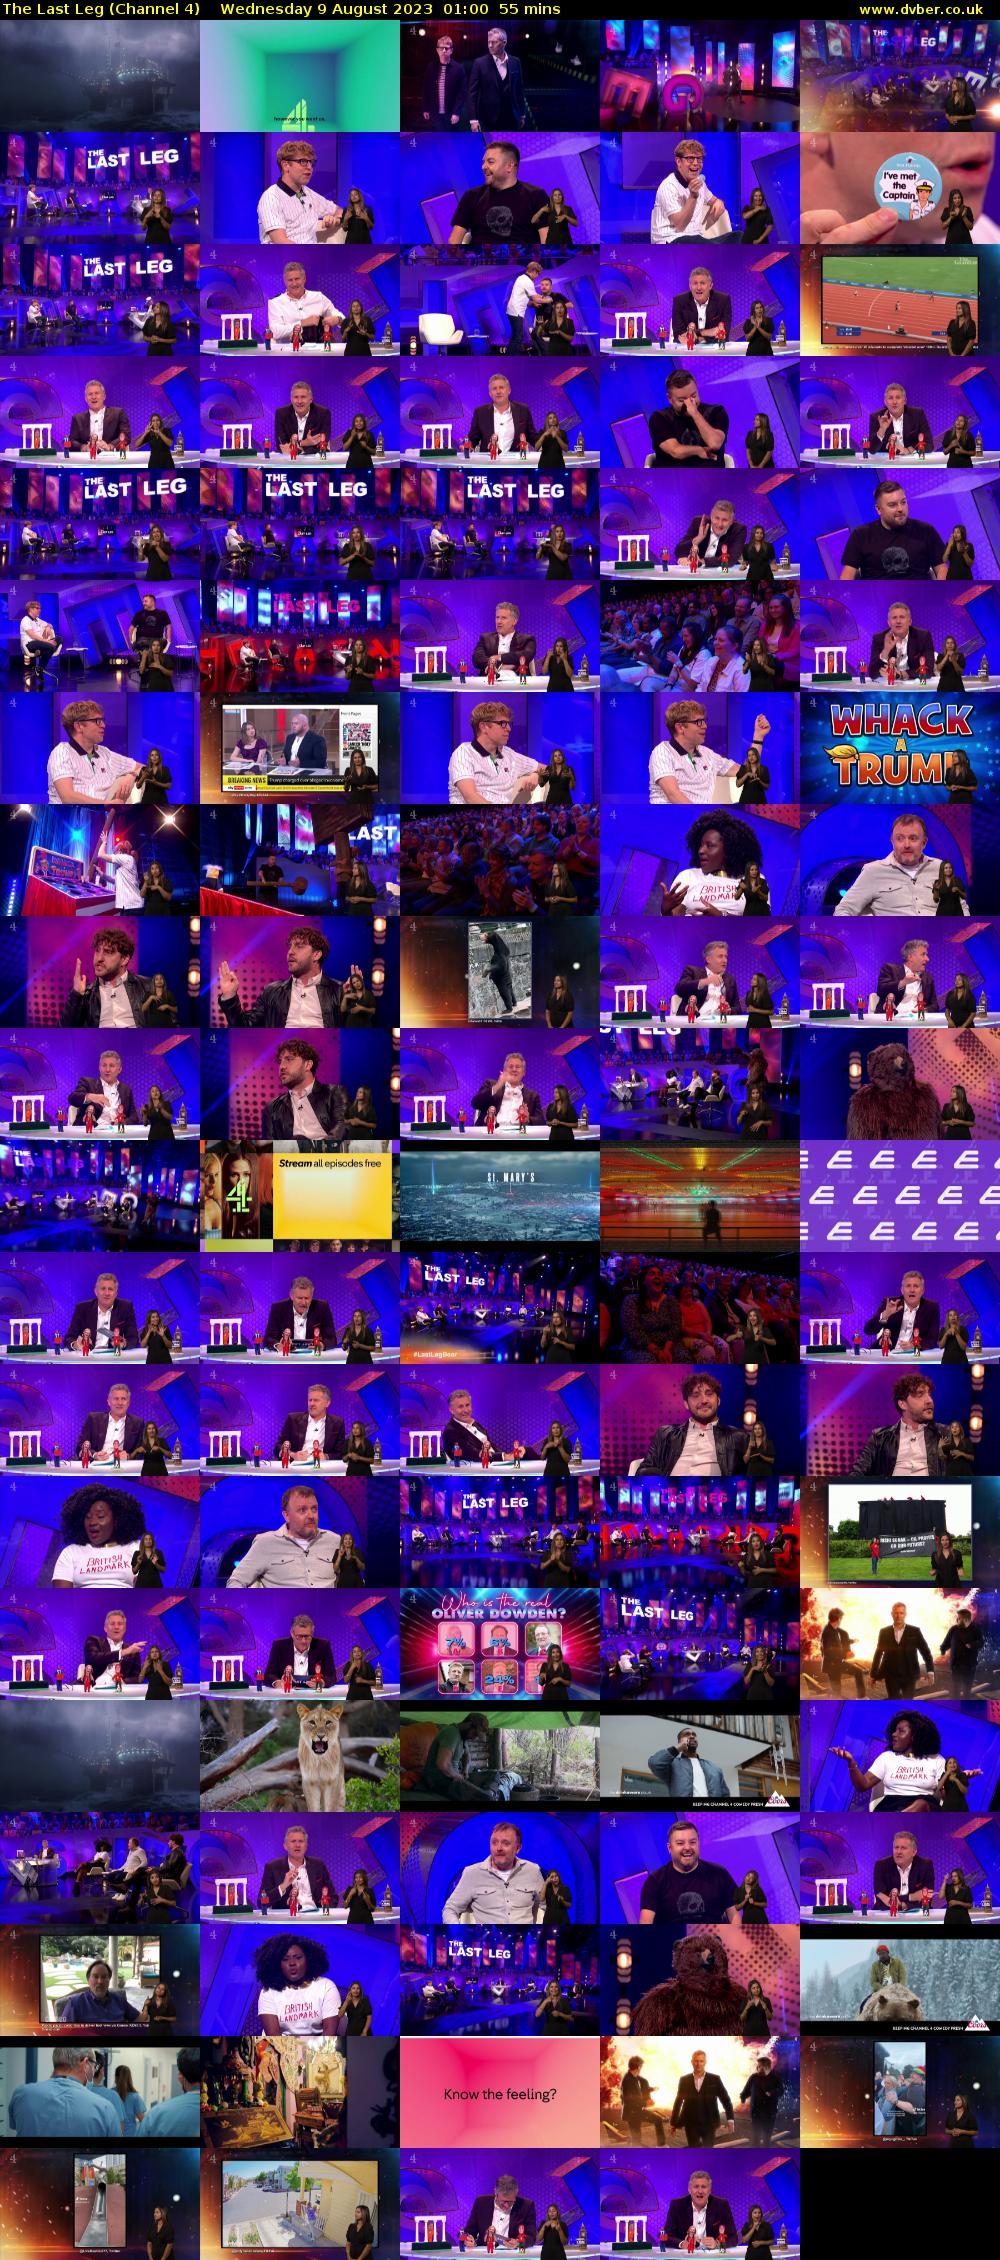 The Last Leg (Channel 4) Wednesday 9 August 2023 01:00 - 01:55